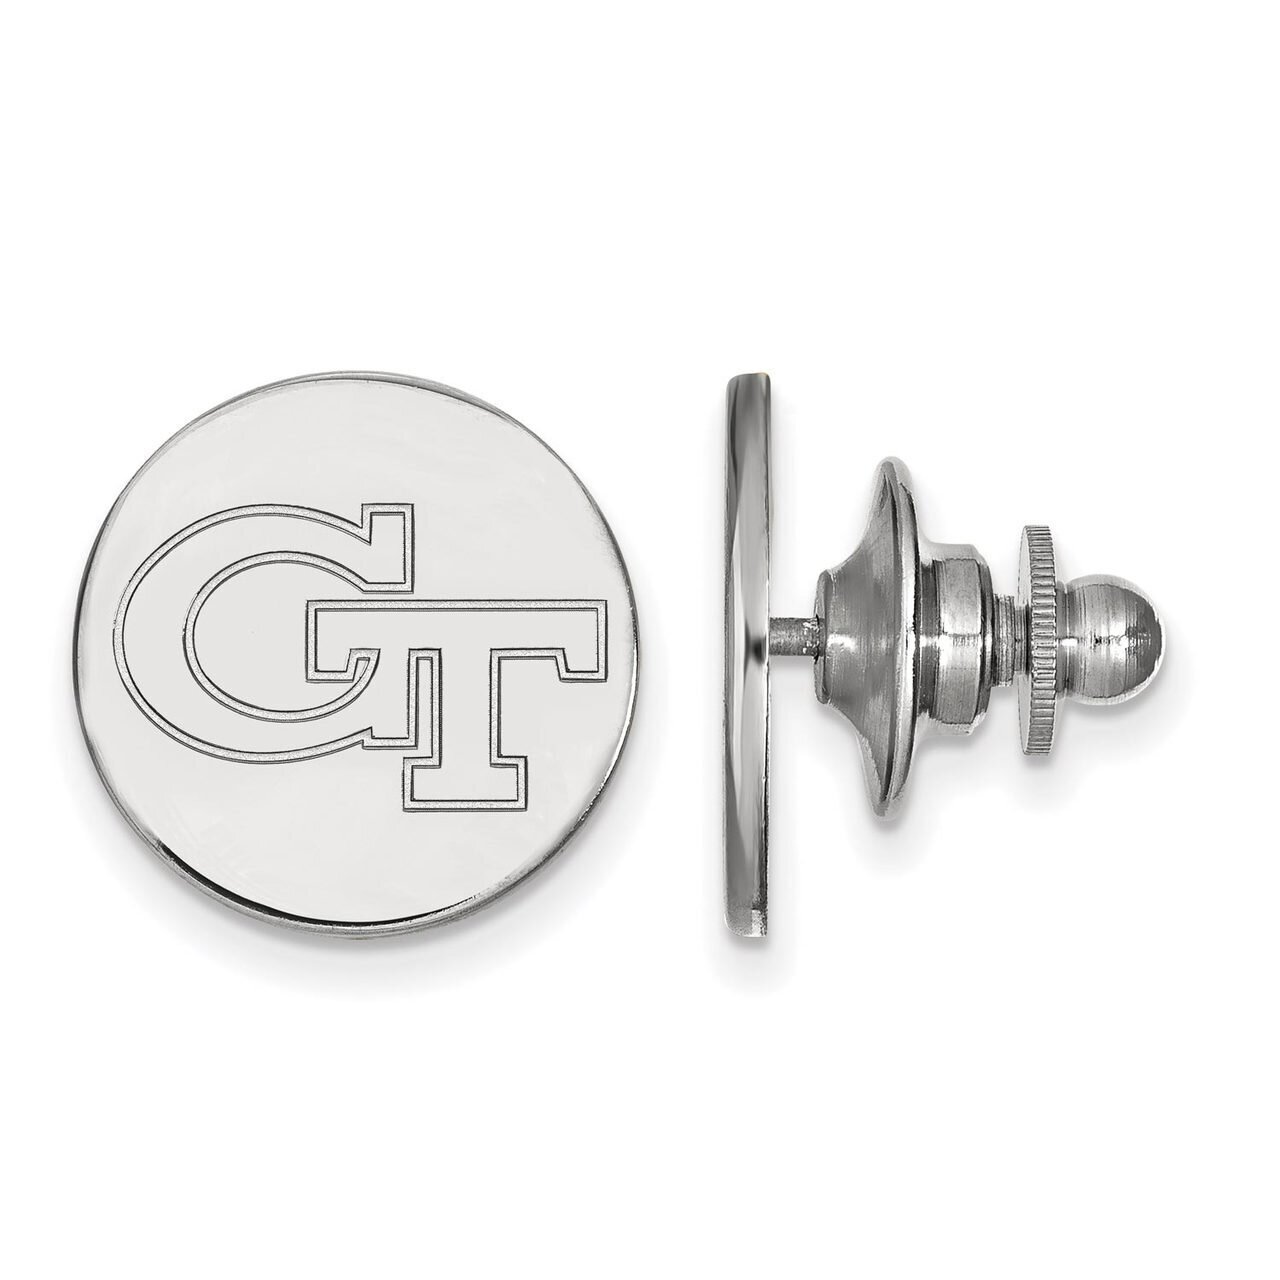 Georgia Institute of Technology Lapel Pin Sterling Silver SS062GT